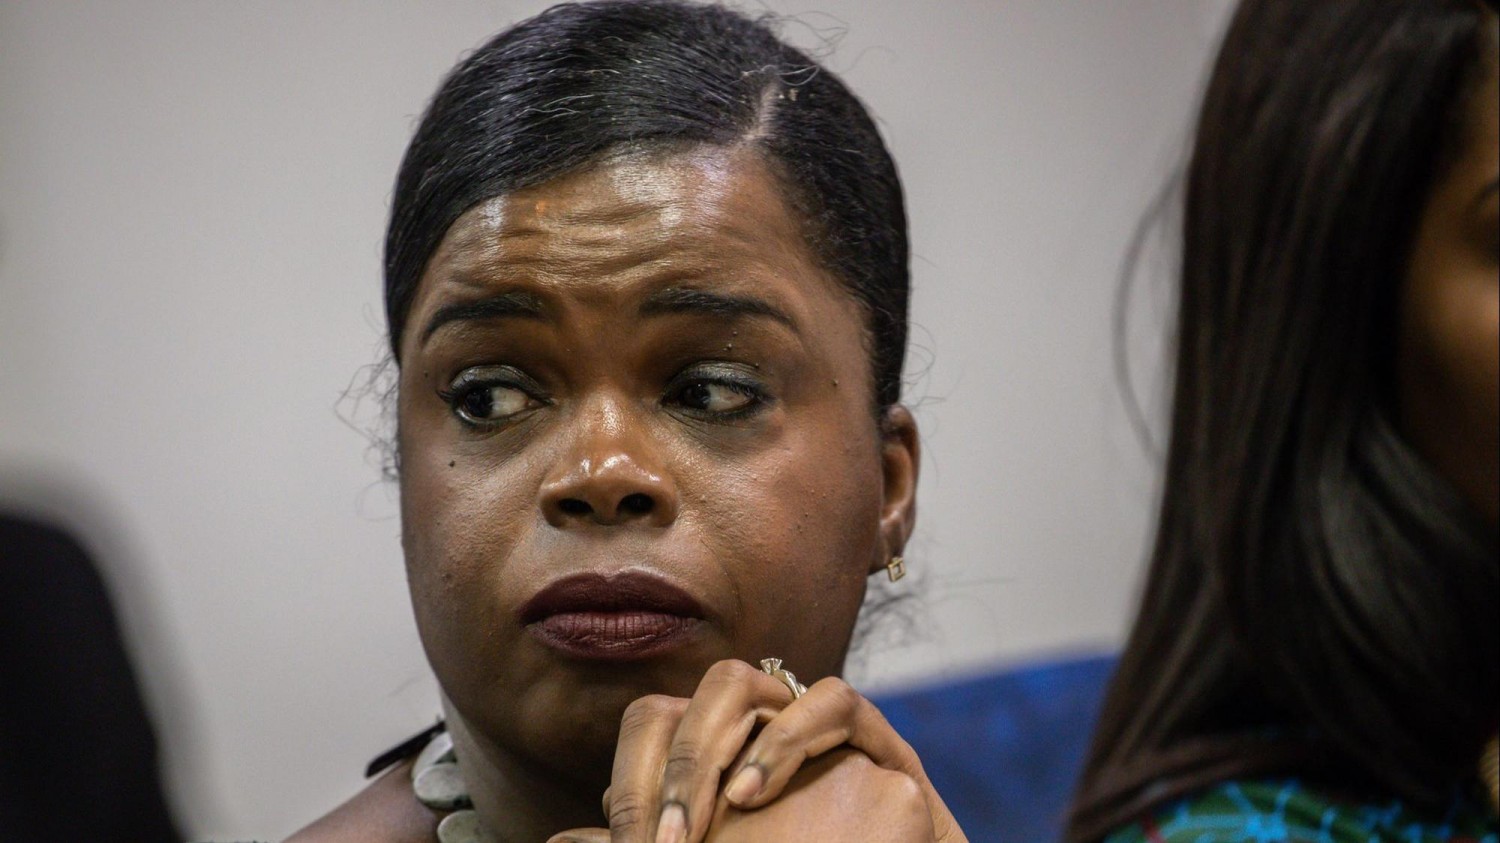 Cook County State's Attorney Kim Foxx, shown May 30, 2019, has kept the Jussie Smollett case in the news. (Zbigniew Bzdak/Chicago Tribune)